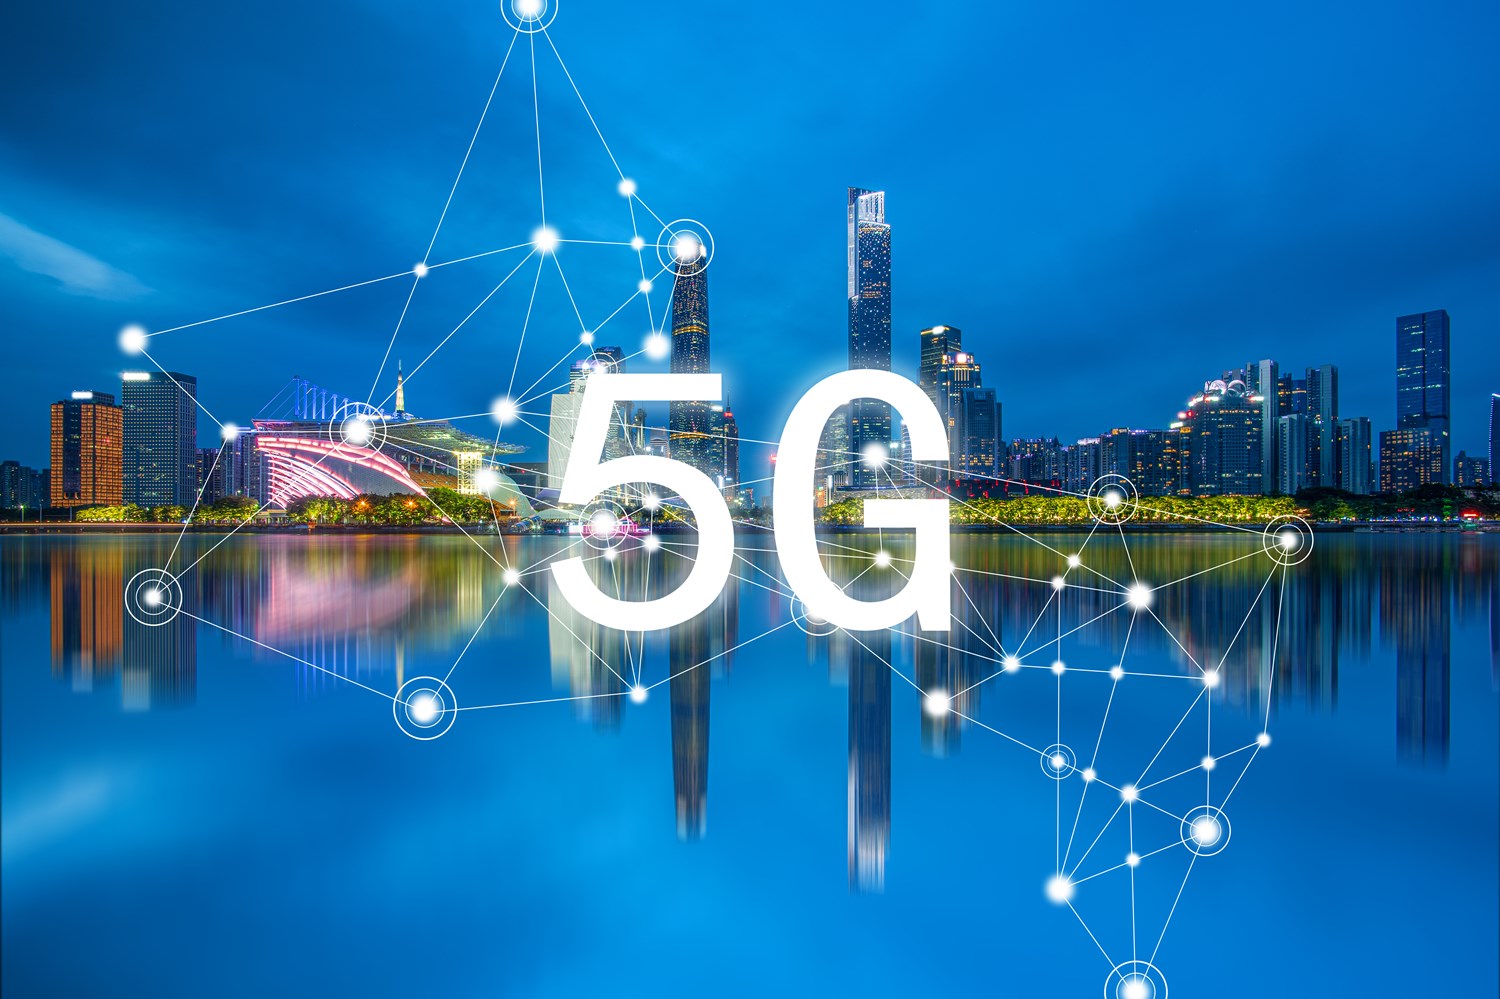 Share | The basics of 5G wireless networks